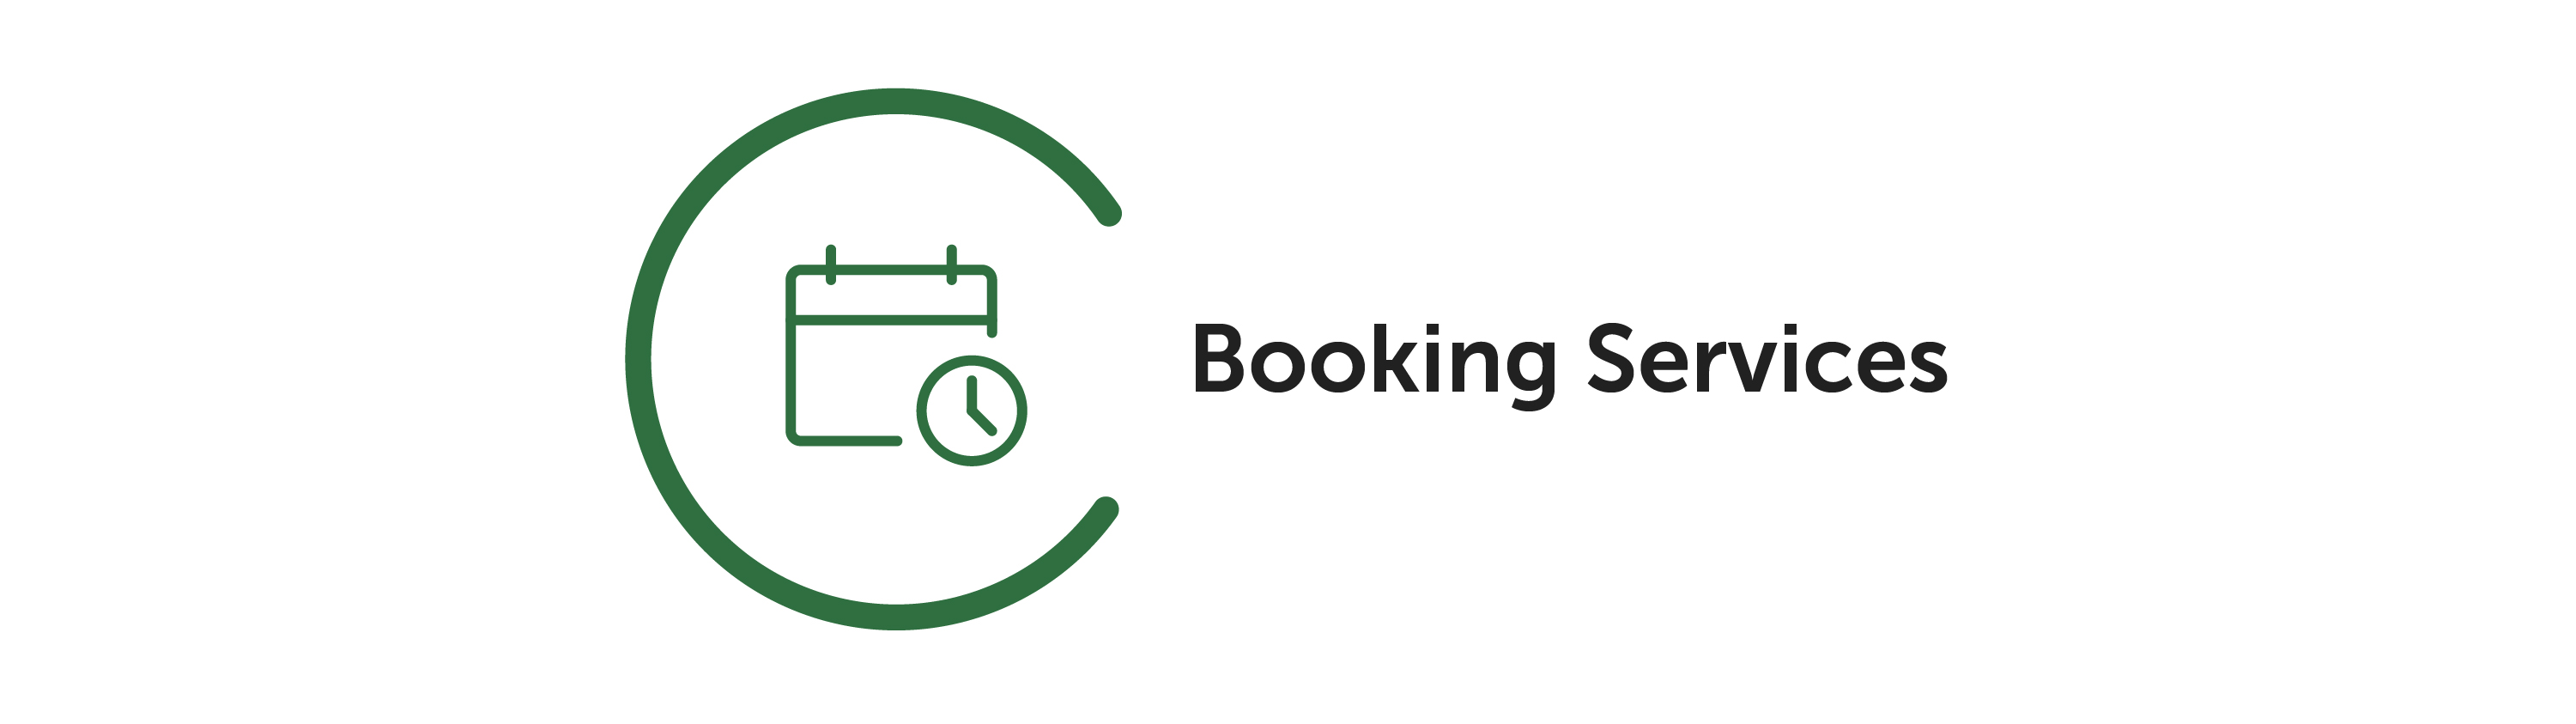 Tradeline Support Booking